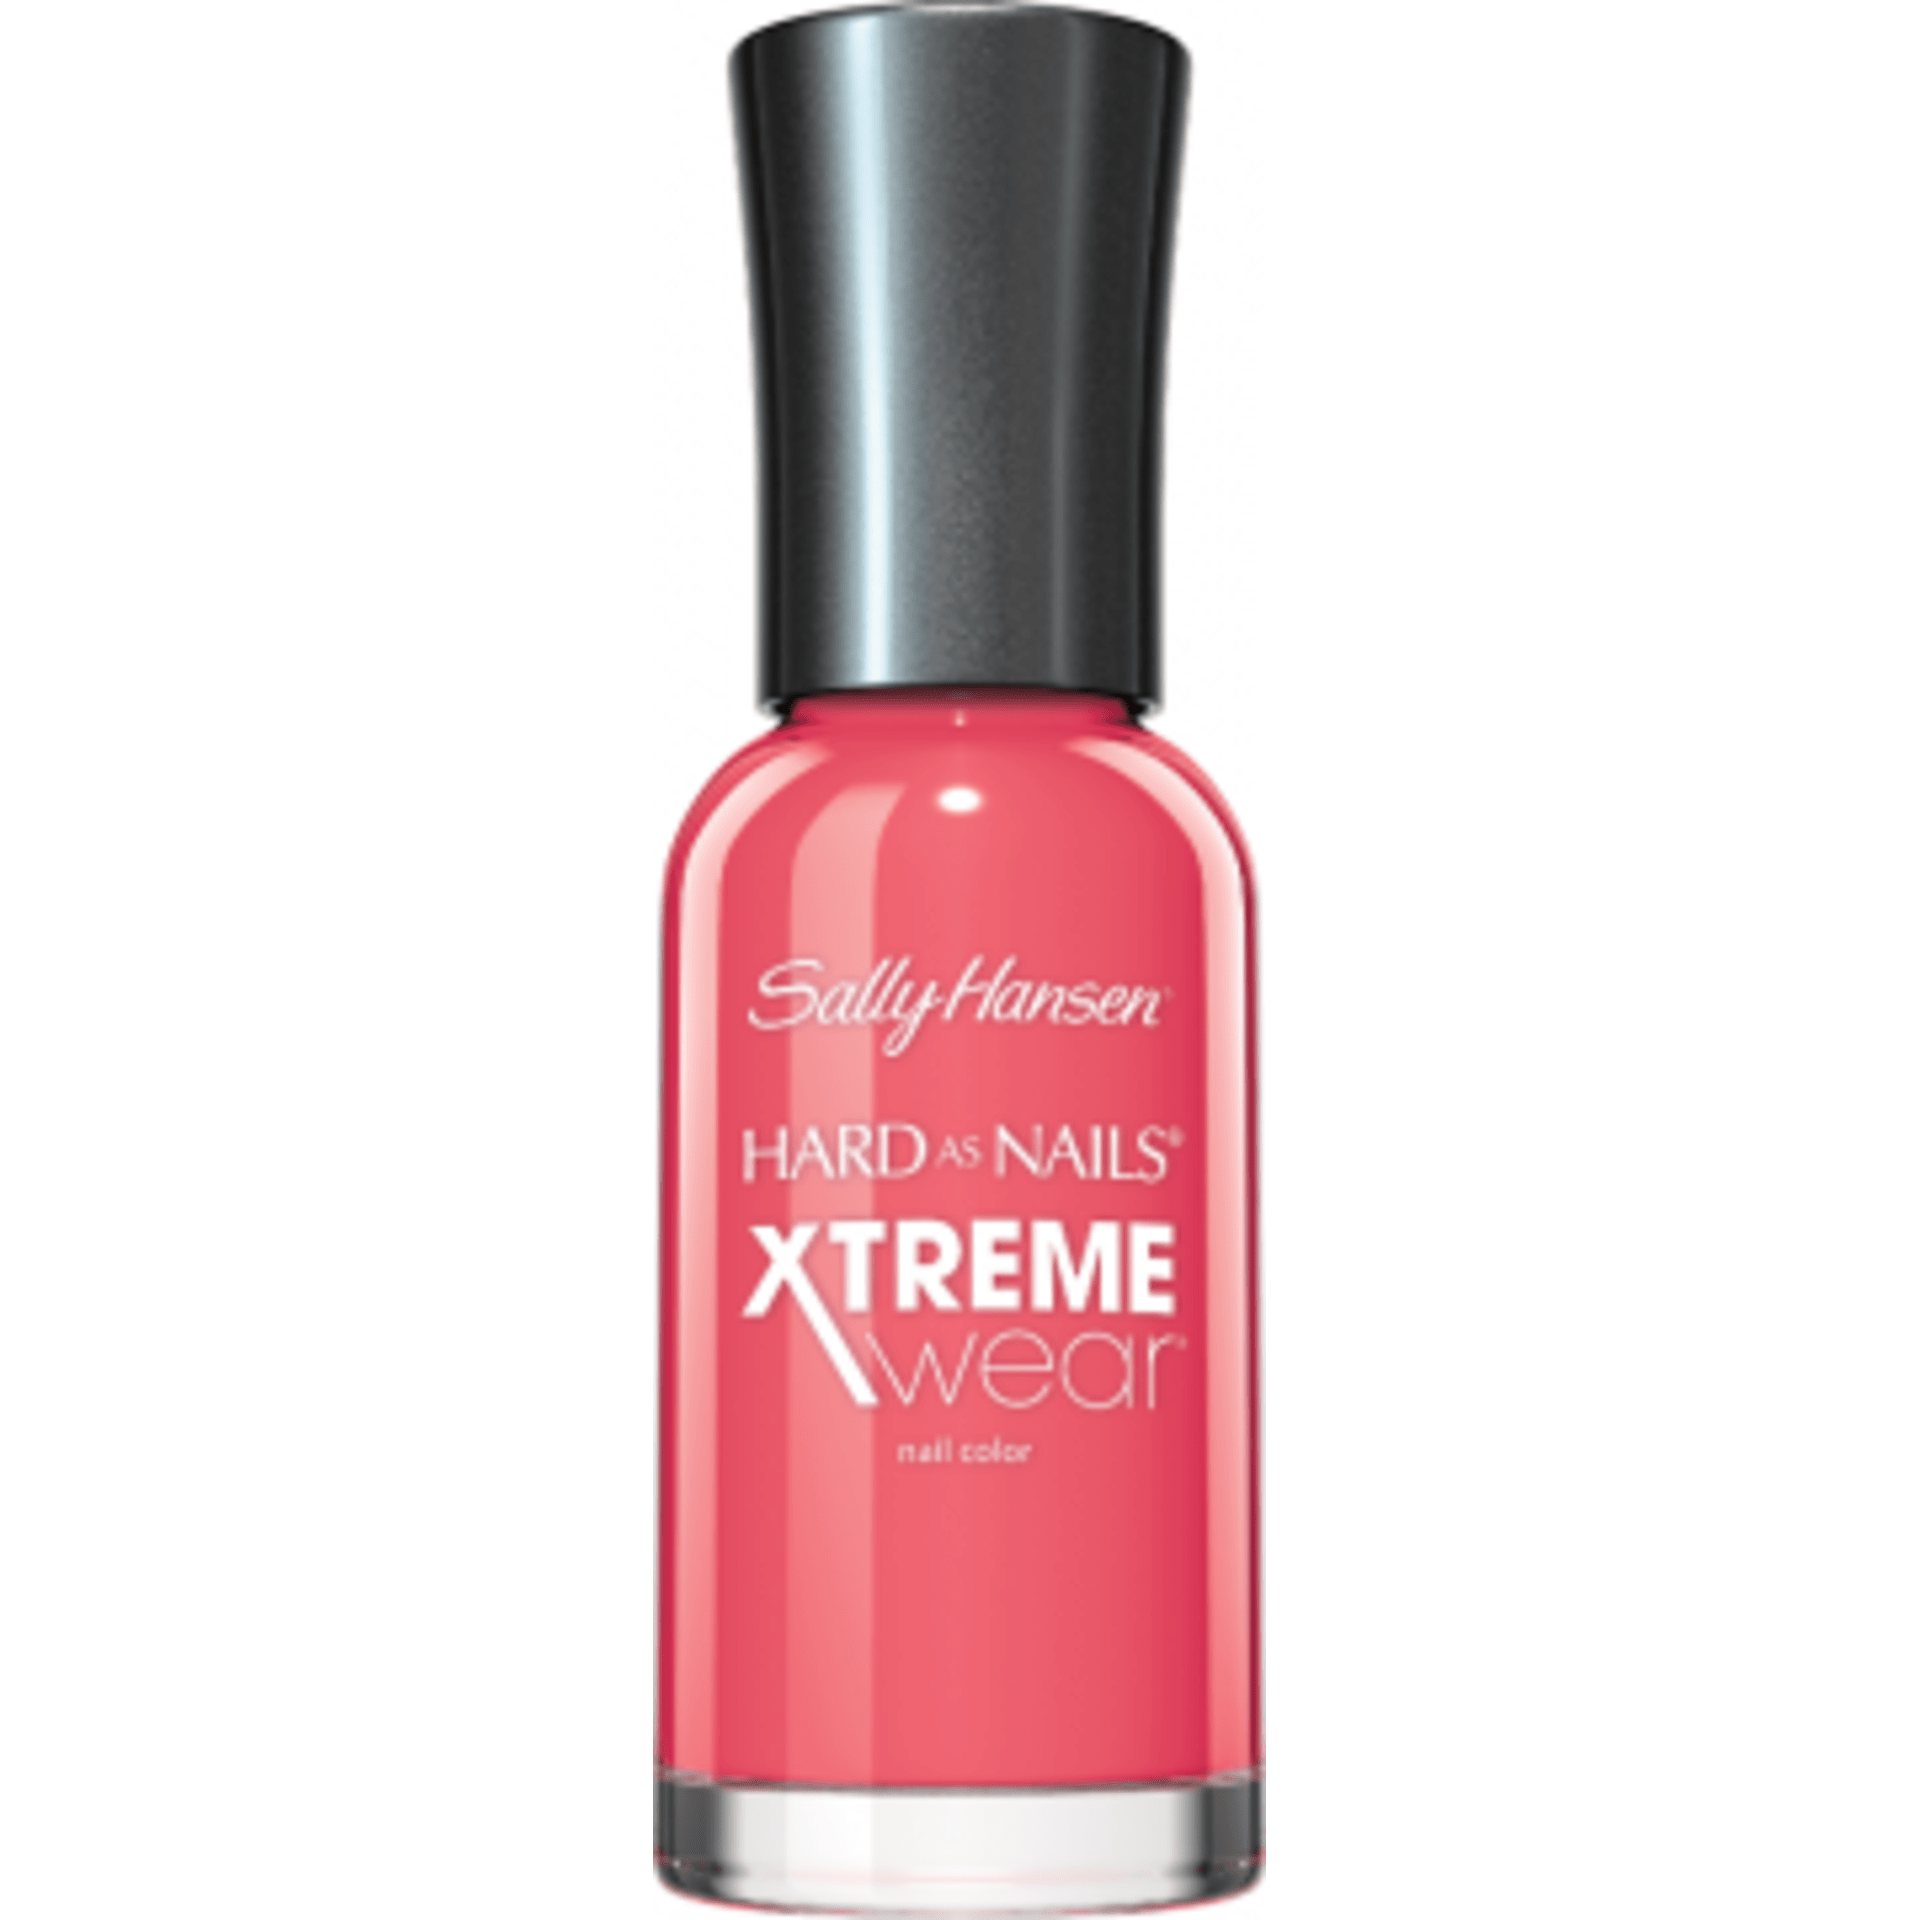 Save on Sally Hansen Hard as Nails Xtreme Wear Nail Polish Black Out 629  Order Online Delivery | MARTIN'S